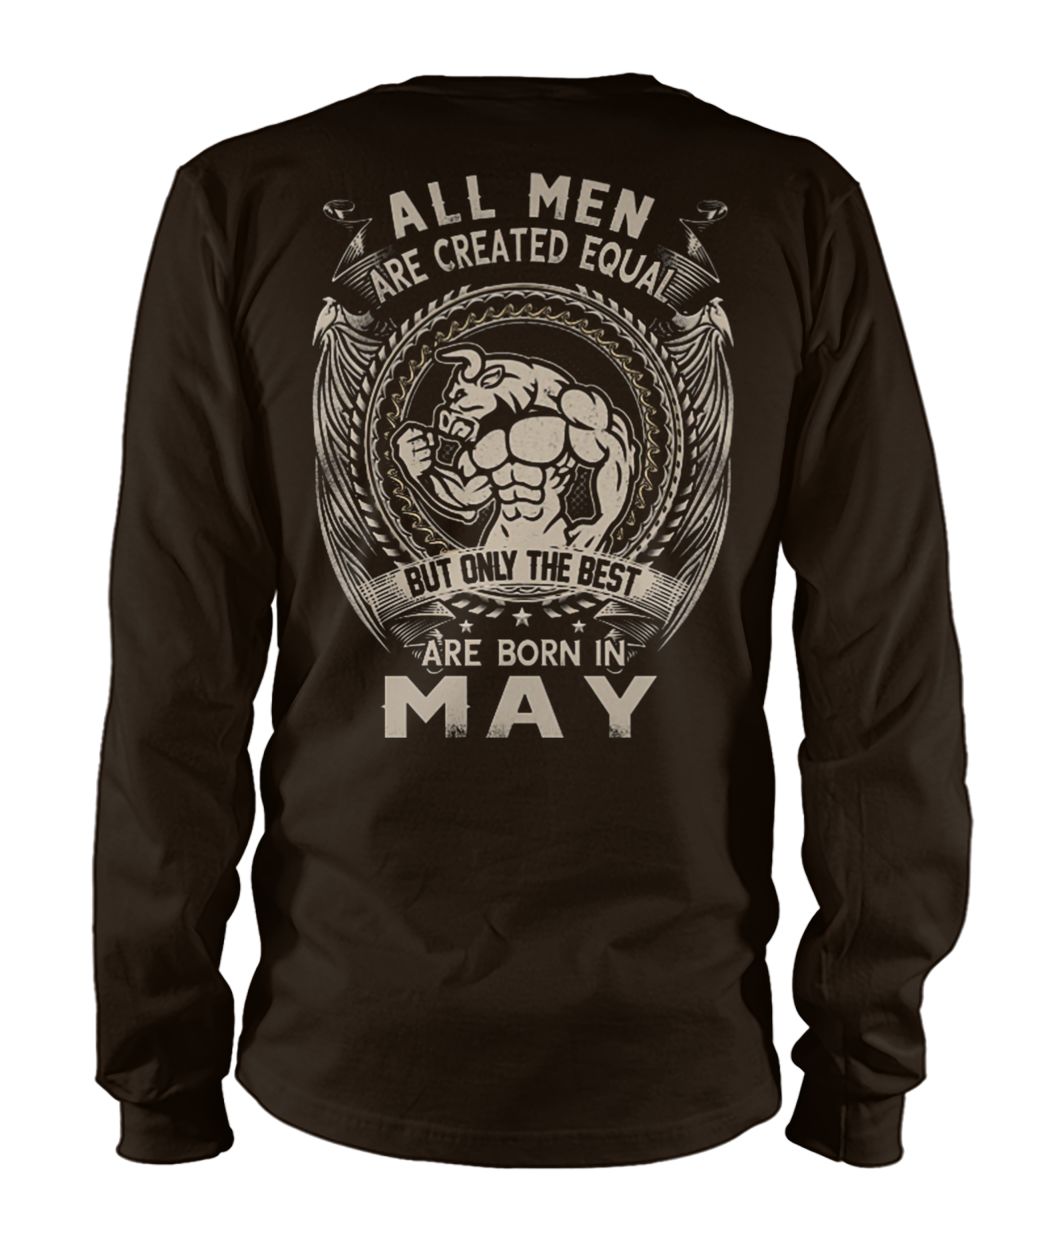 All men are created equal but only the best are born in may unisex long sleeve